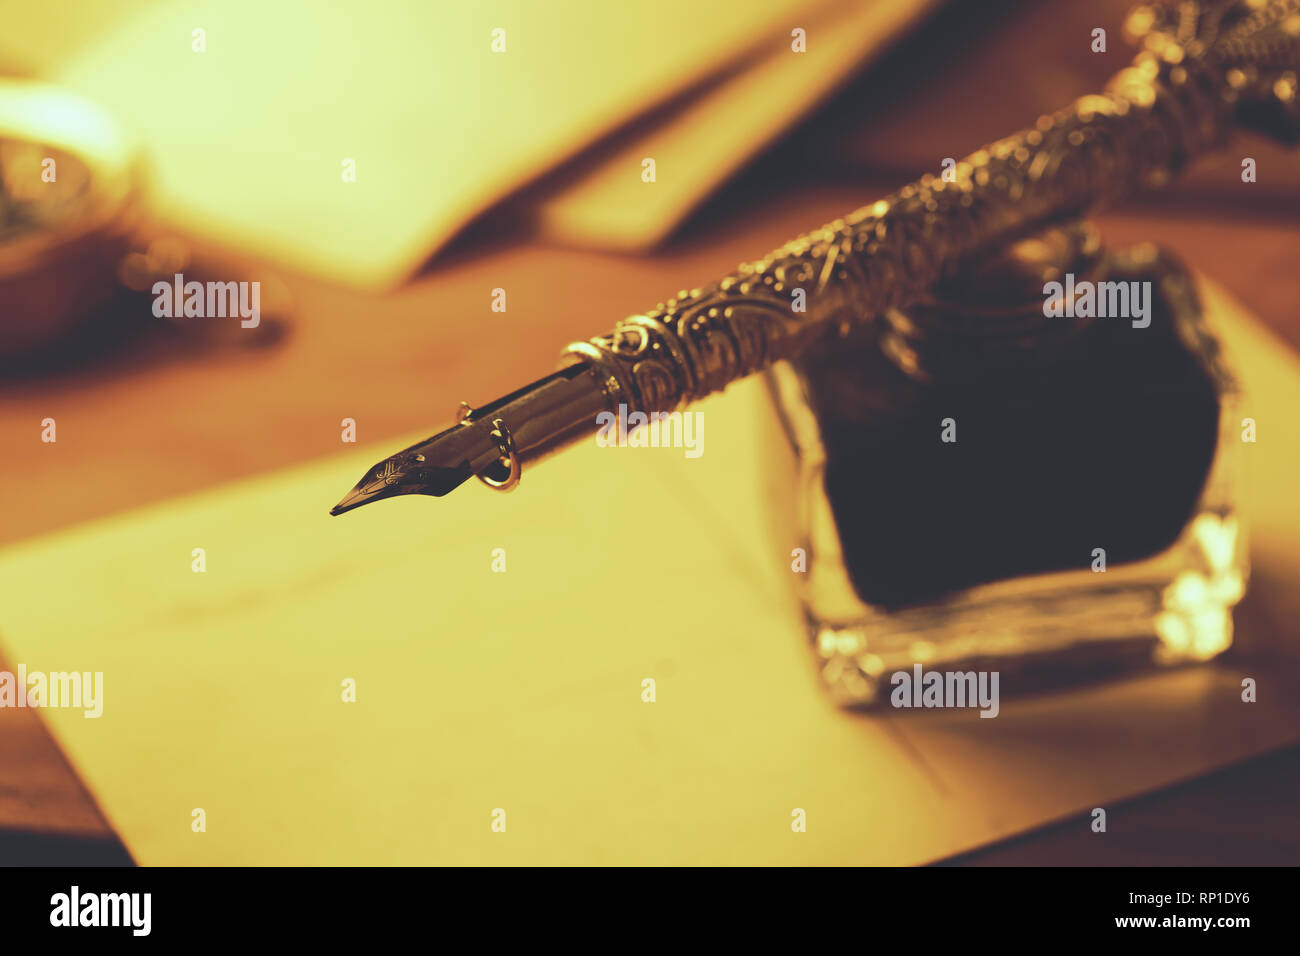 writing message with ancient quill pen Stock Photo